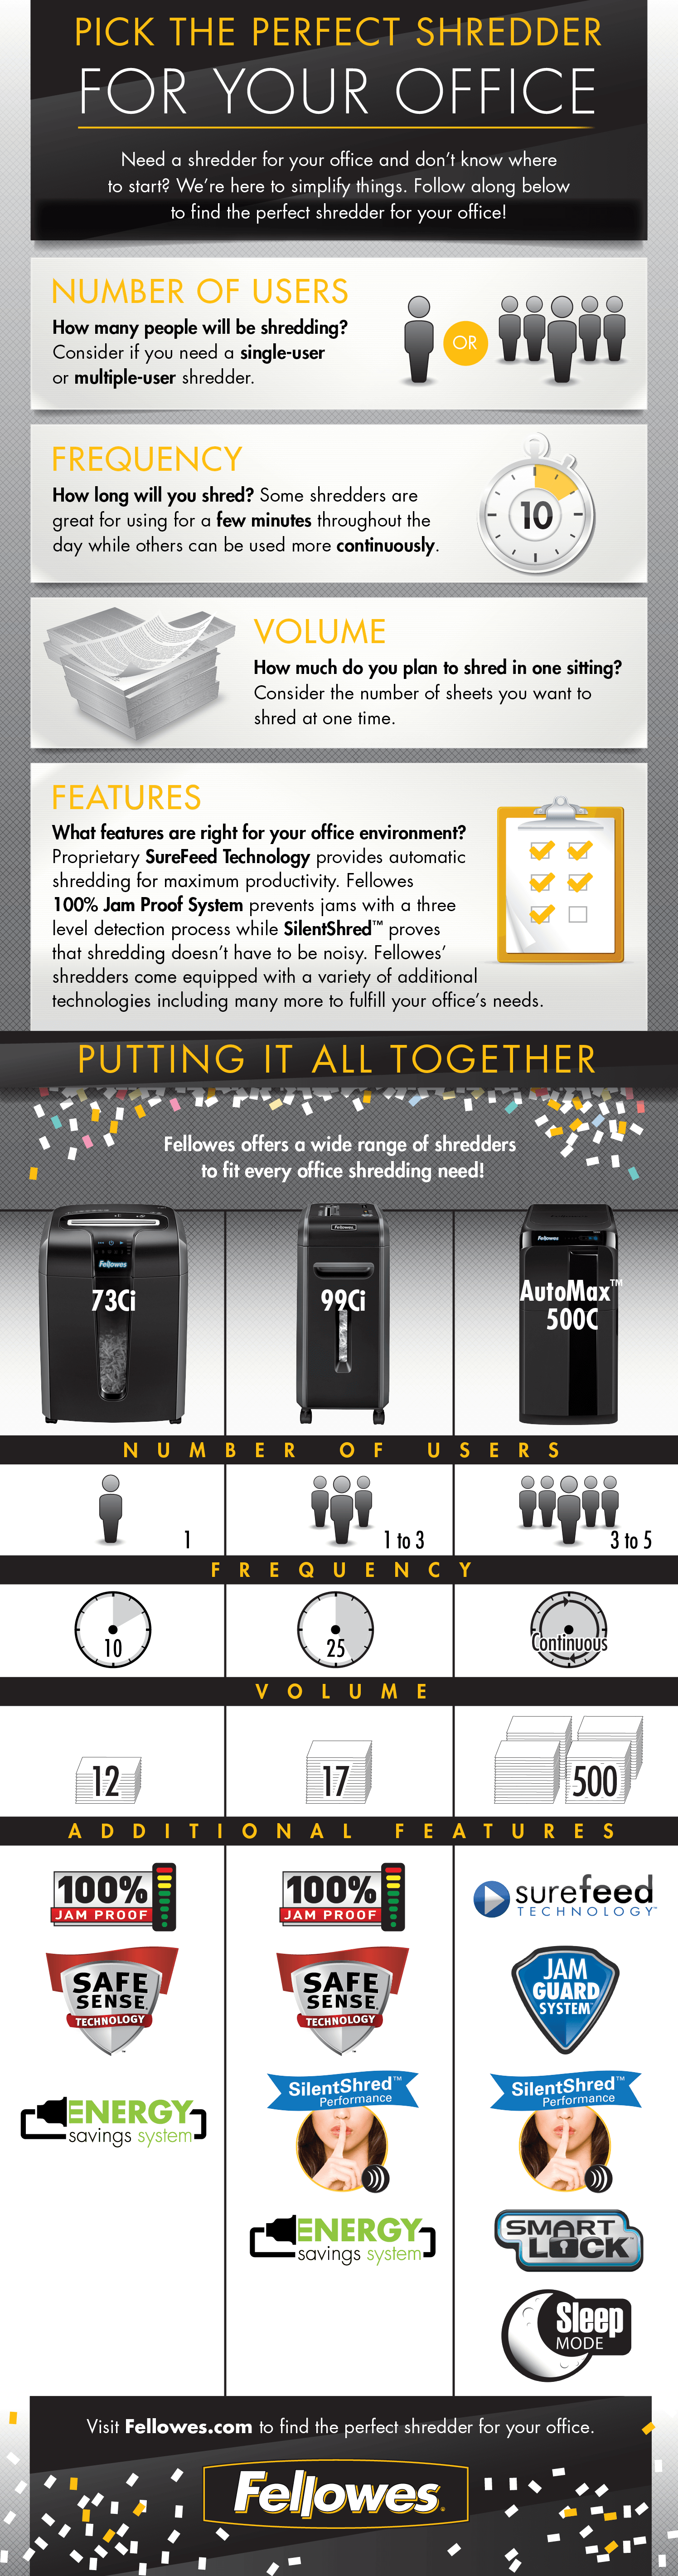 dtd fellowes office 2 infographic image